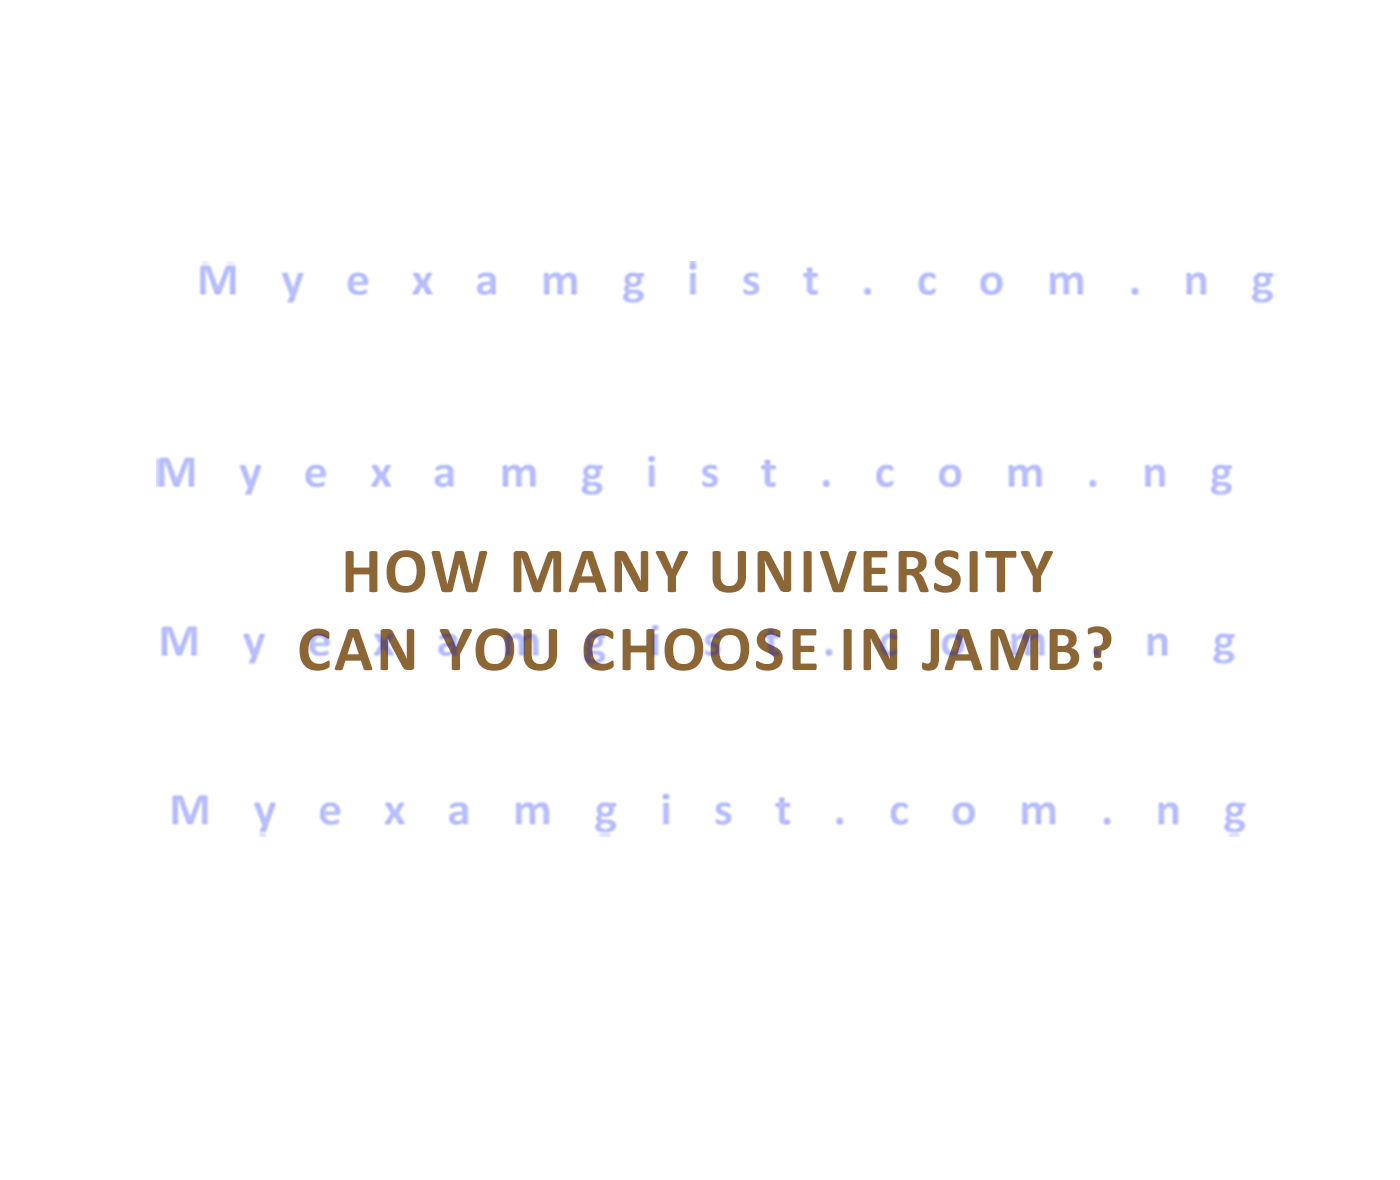 How many university can you choose in JAMB?